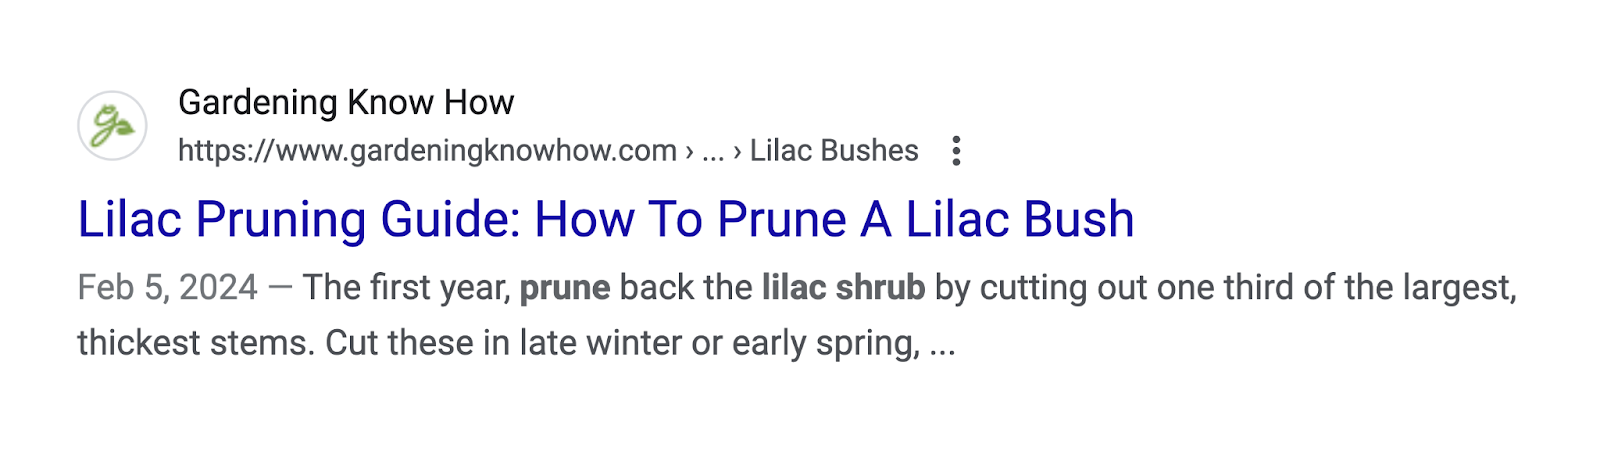 serp listing for lilac pruning guide doesn't show schema markup